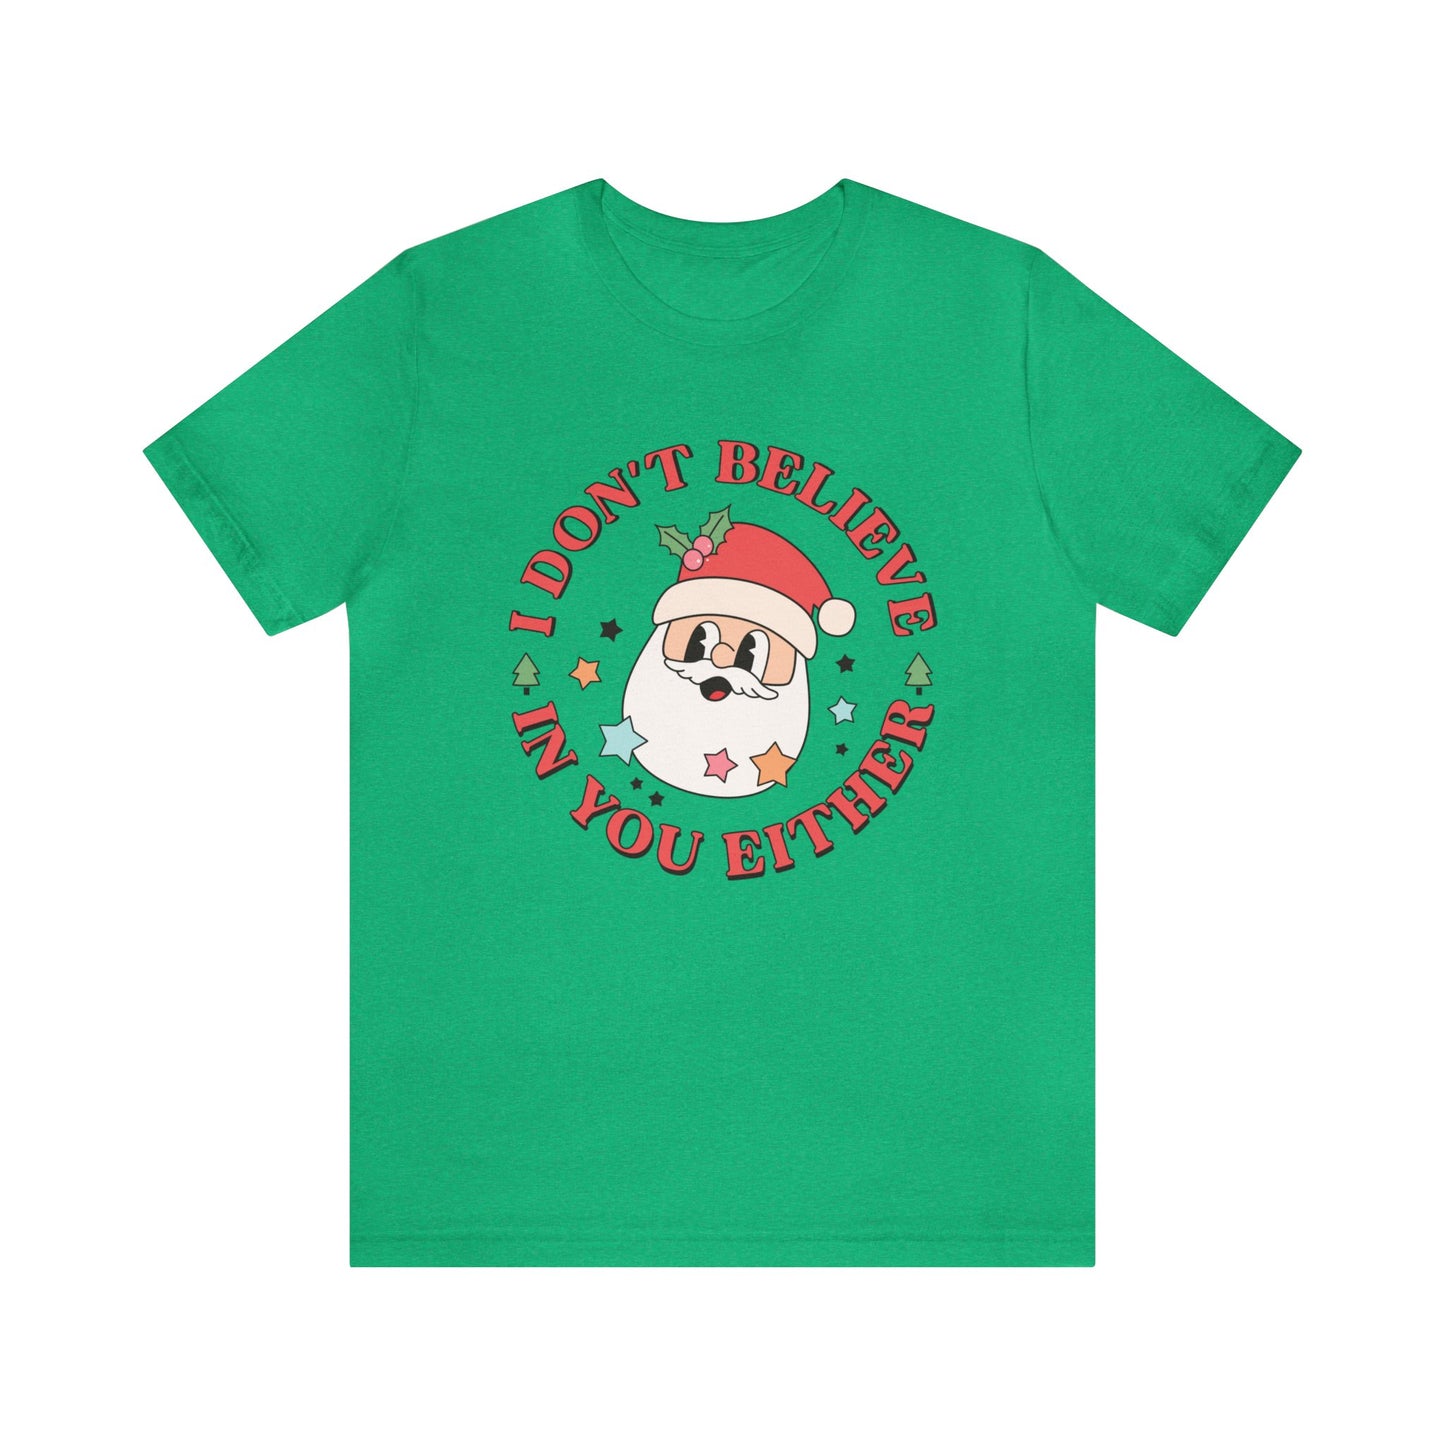 Funny Santa Claus Christmas T-Shirt, Unisex Don't believe Christmas Tee, Family Matching Holiday Shirt Gift for Her, Coworker friend  tshirt